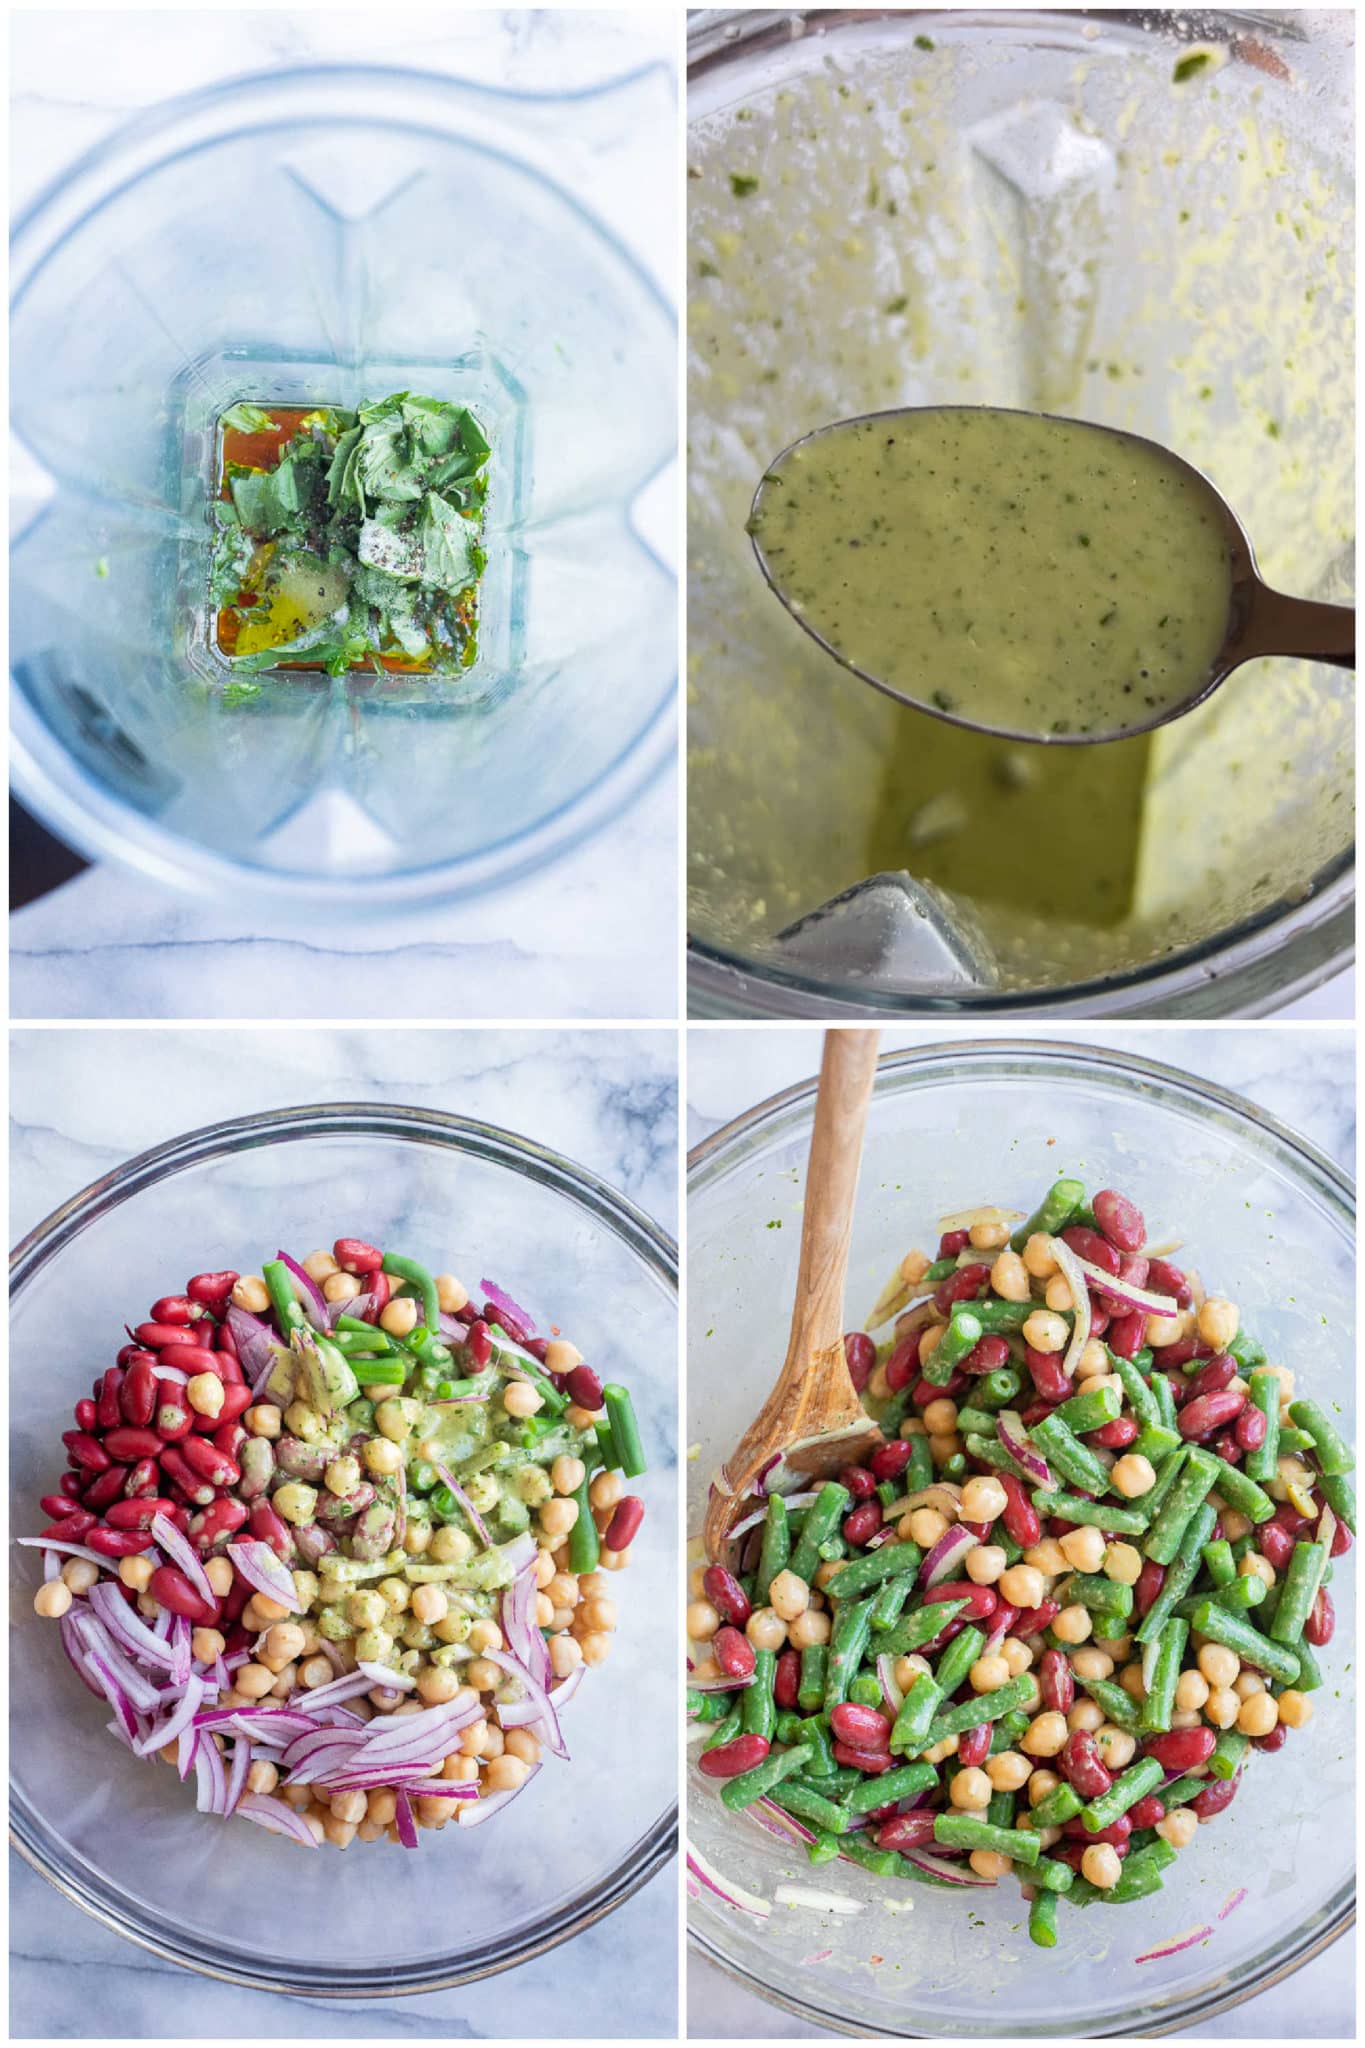 showing how to make the basil vinaigrette and mix it into the three bean salad